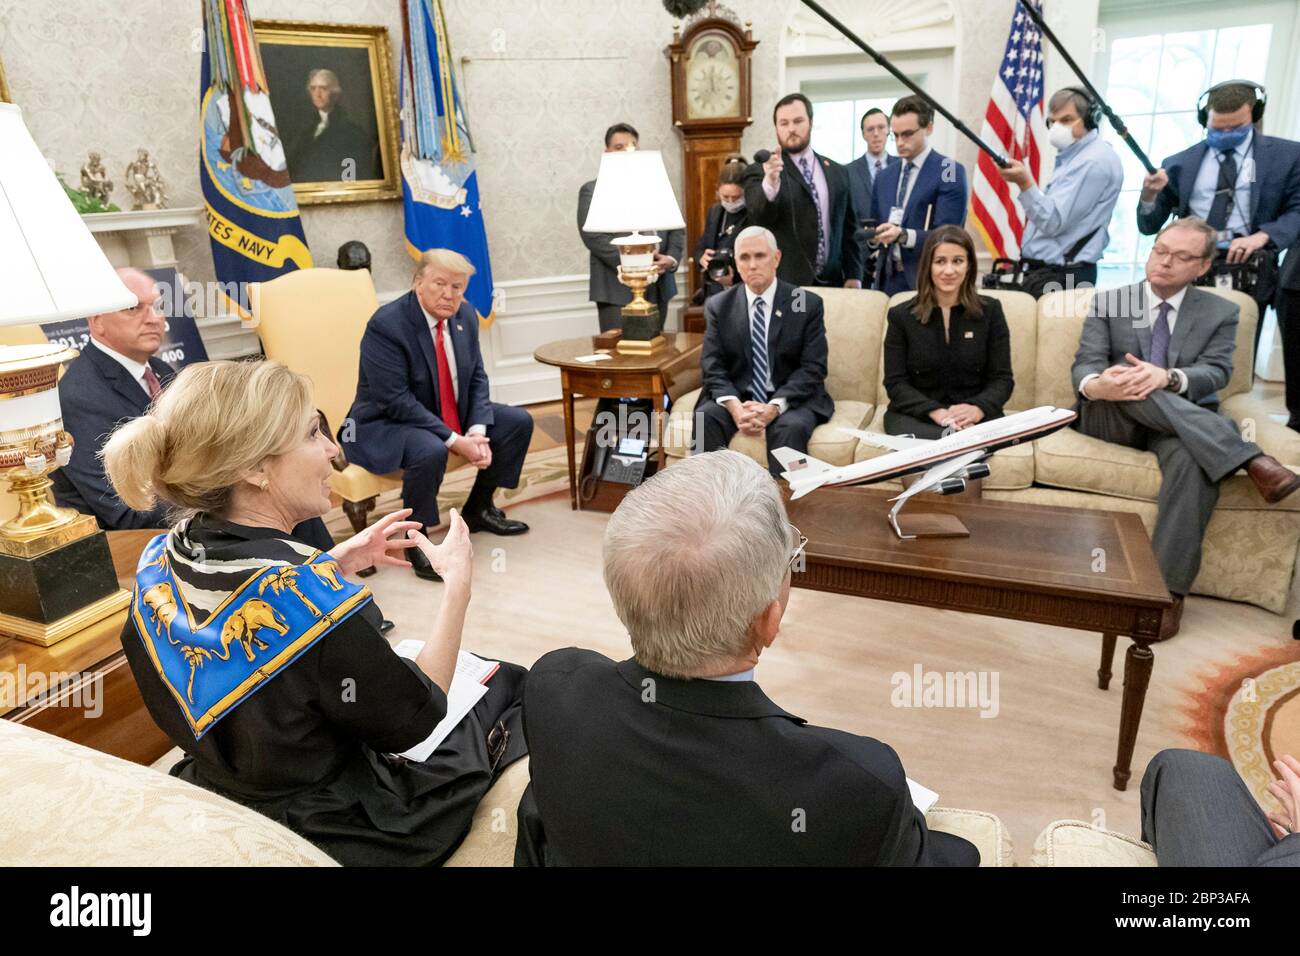 U.S. President Donald Trump meets with Louisiana Gov. John Bel Edwards to discuss the COVID-19, coronavirus pandemic in the Oval Office of the White House April 29, 2020 in Washington, D.C. Stock Photo